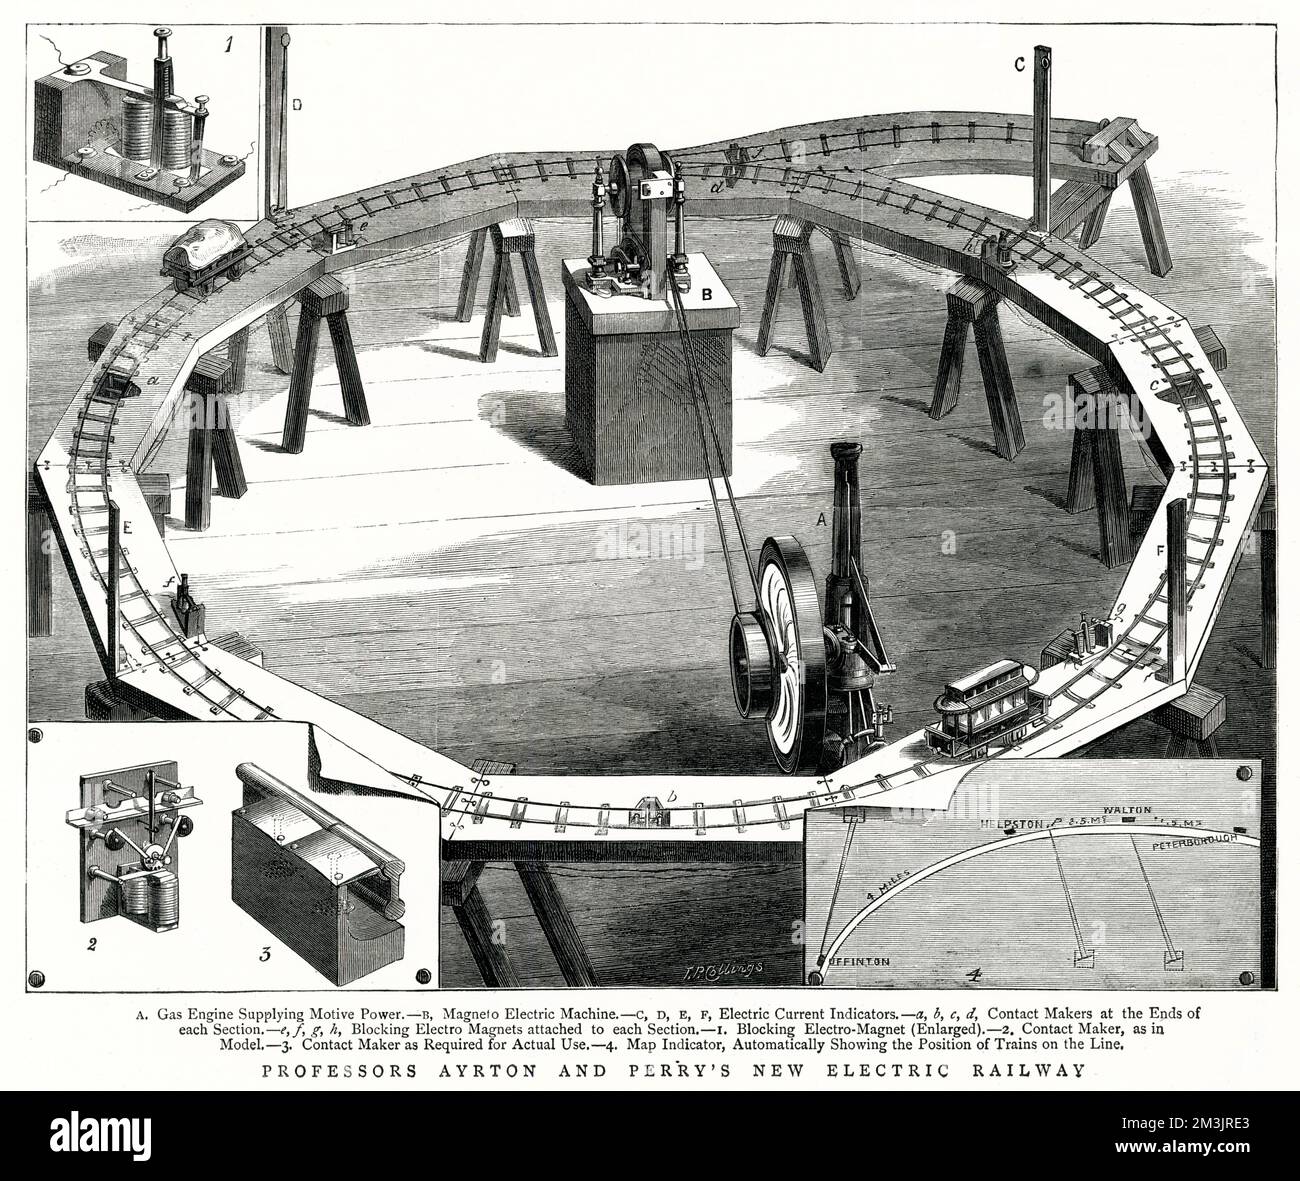 A model of a electrical railway designed by Professors Ayrton and Perry. There were a number of dynamo-electric machines in the experimental stages, however the problem lay in the efficency of electrical usage. Ayrton and Perry invented a well insulated cable that ran along side the railway track, instead of directly through the track.     Date: 1882 Stock Photo